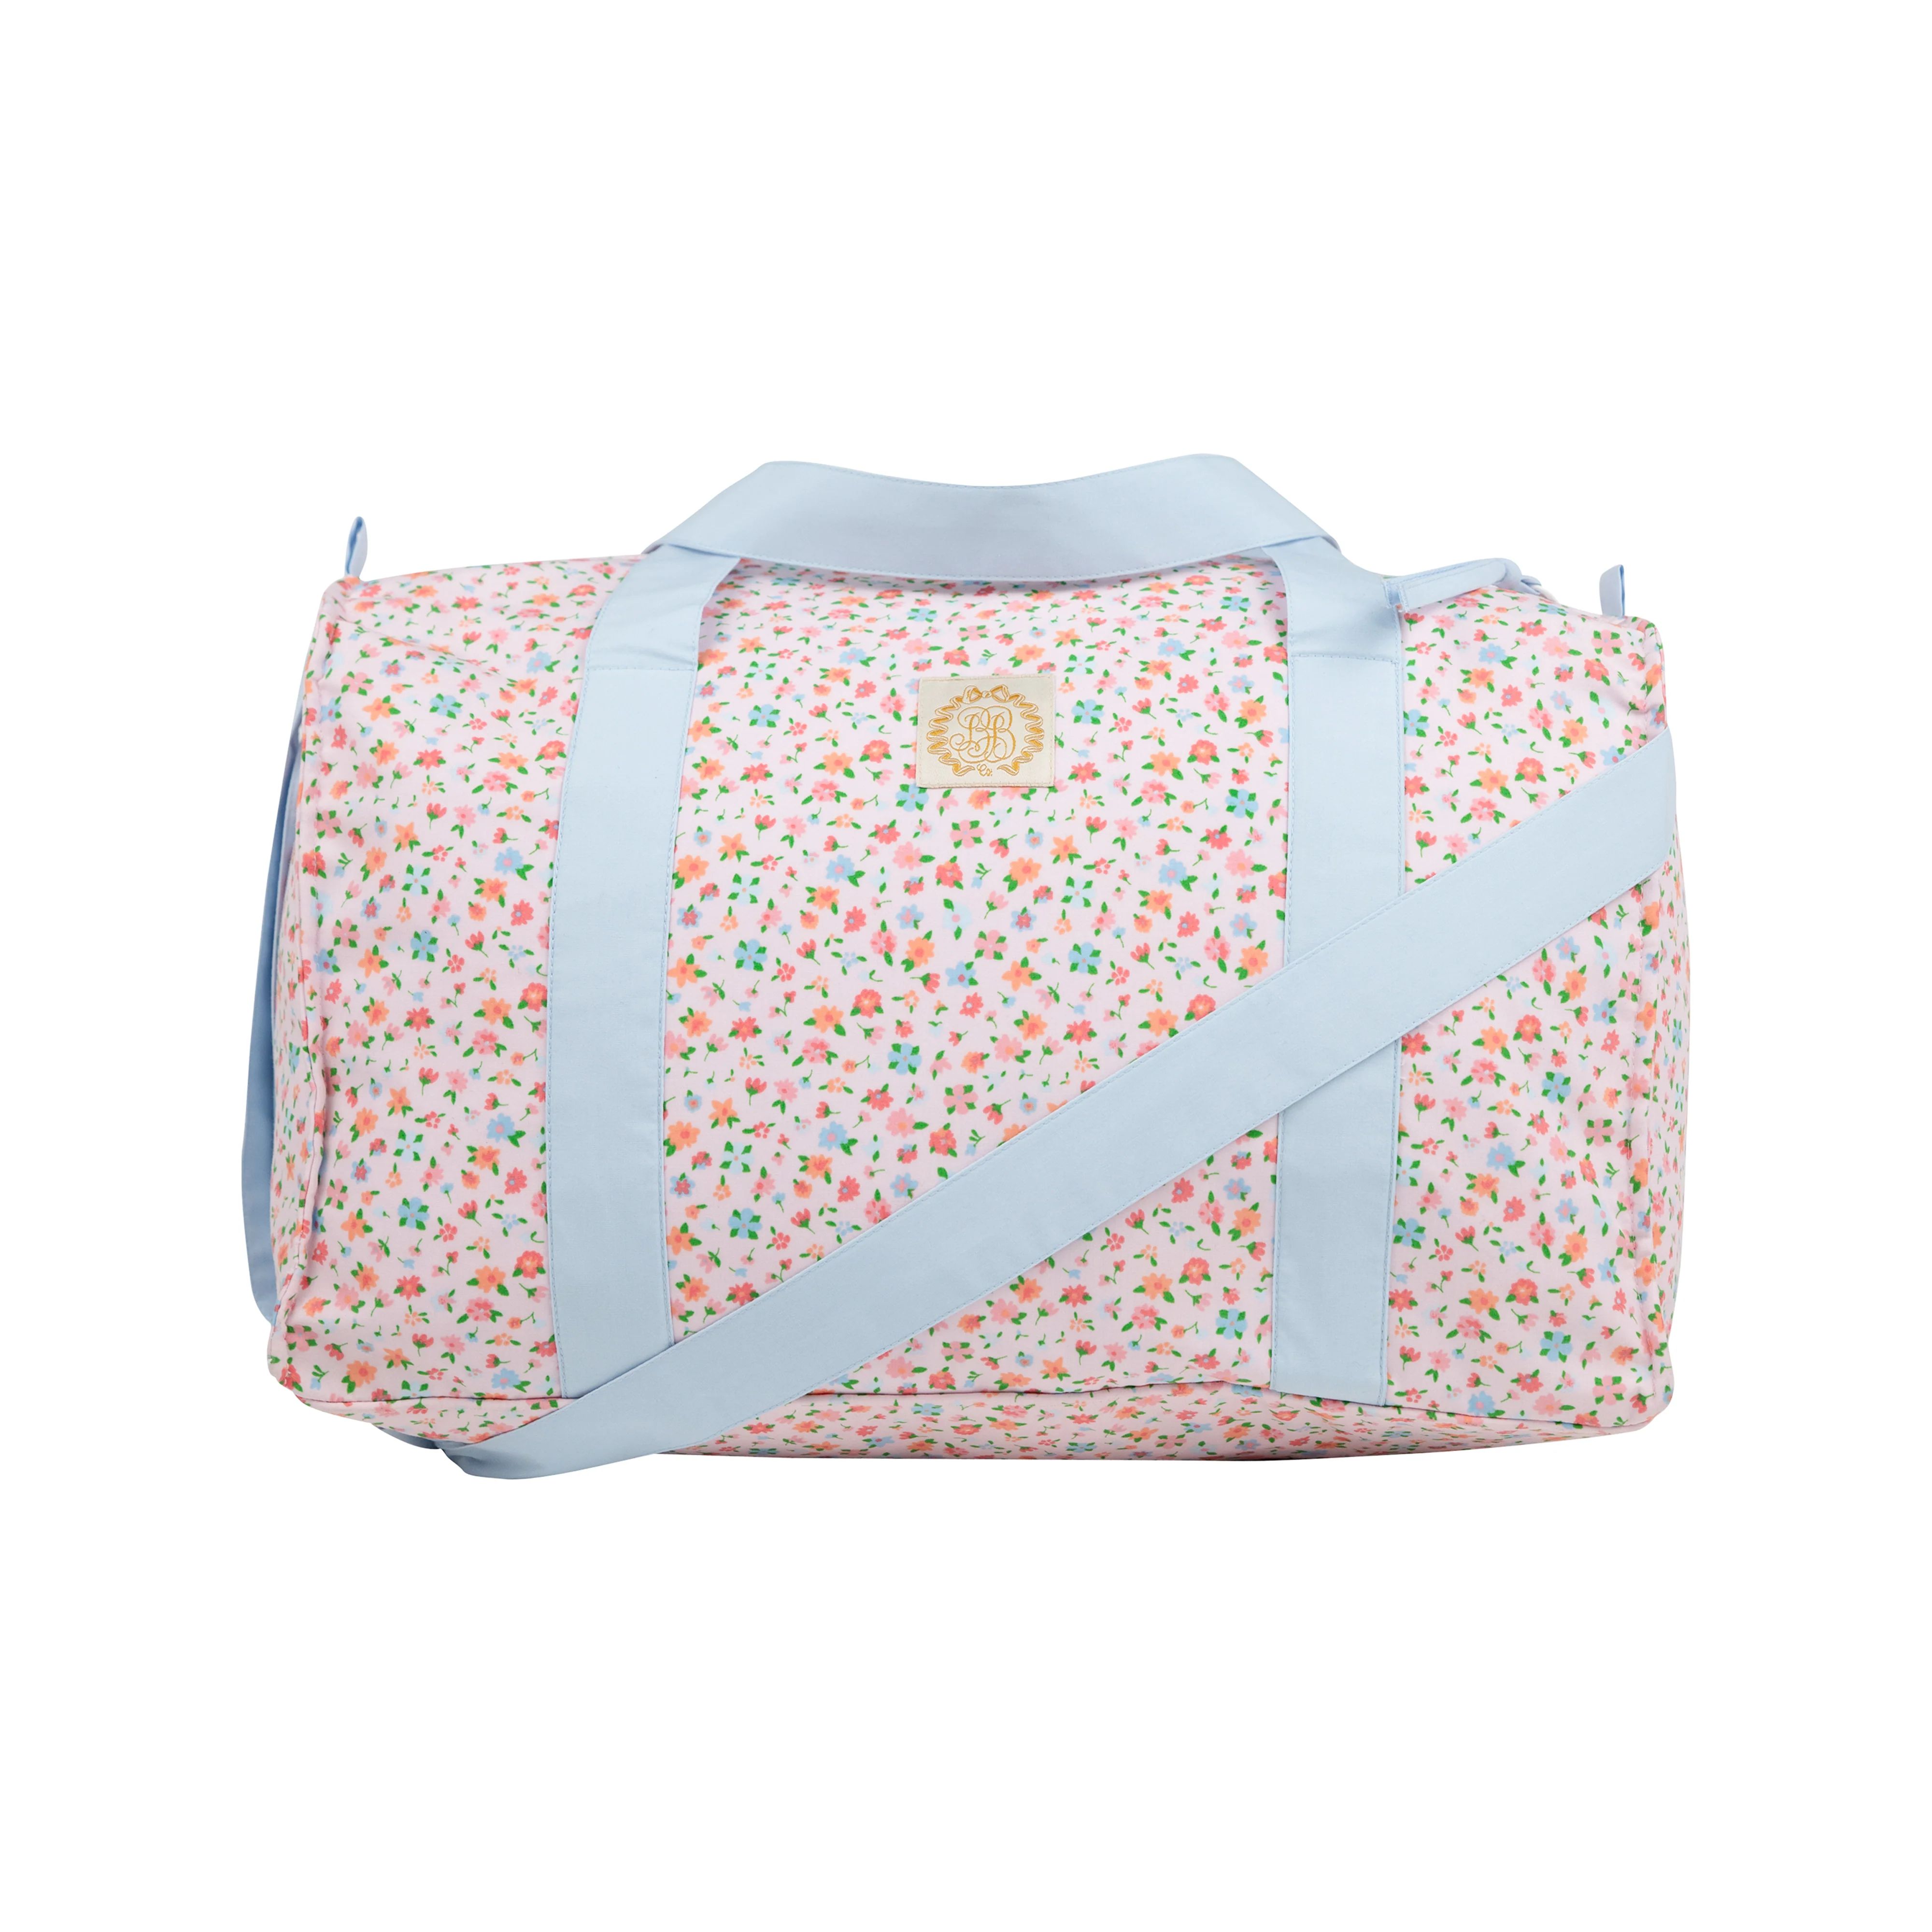 Stewart Sleepover Tote - Fall Fest Floral with Buckhead Blue | The Beaufort Bonnet Company